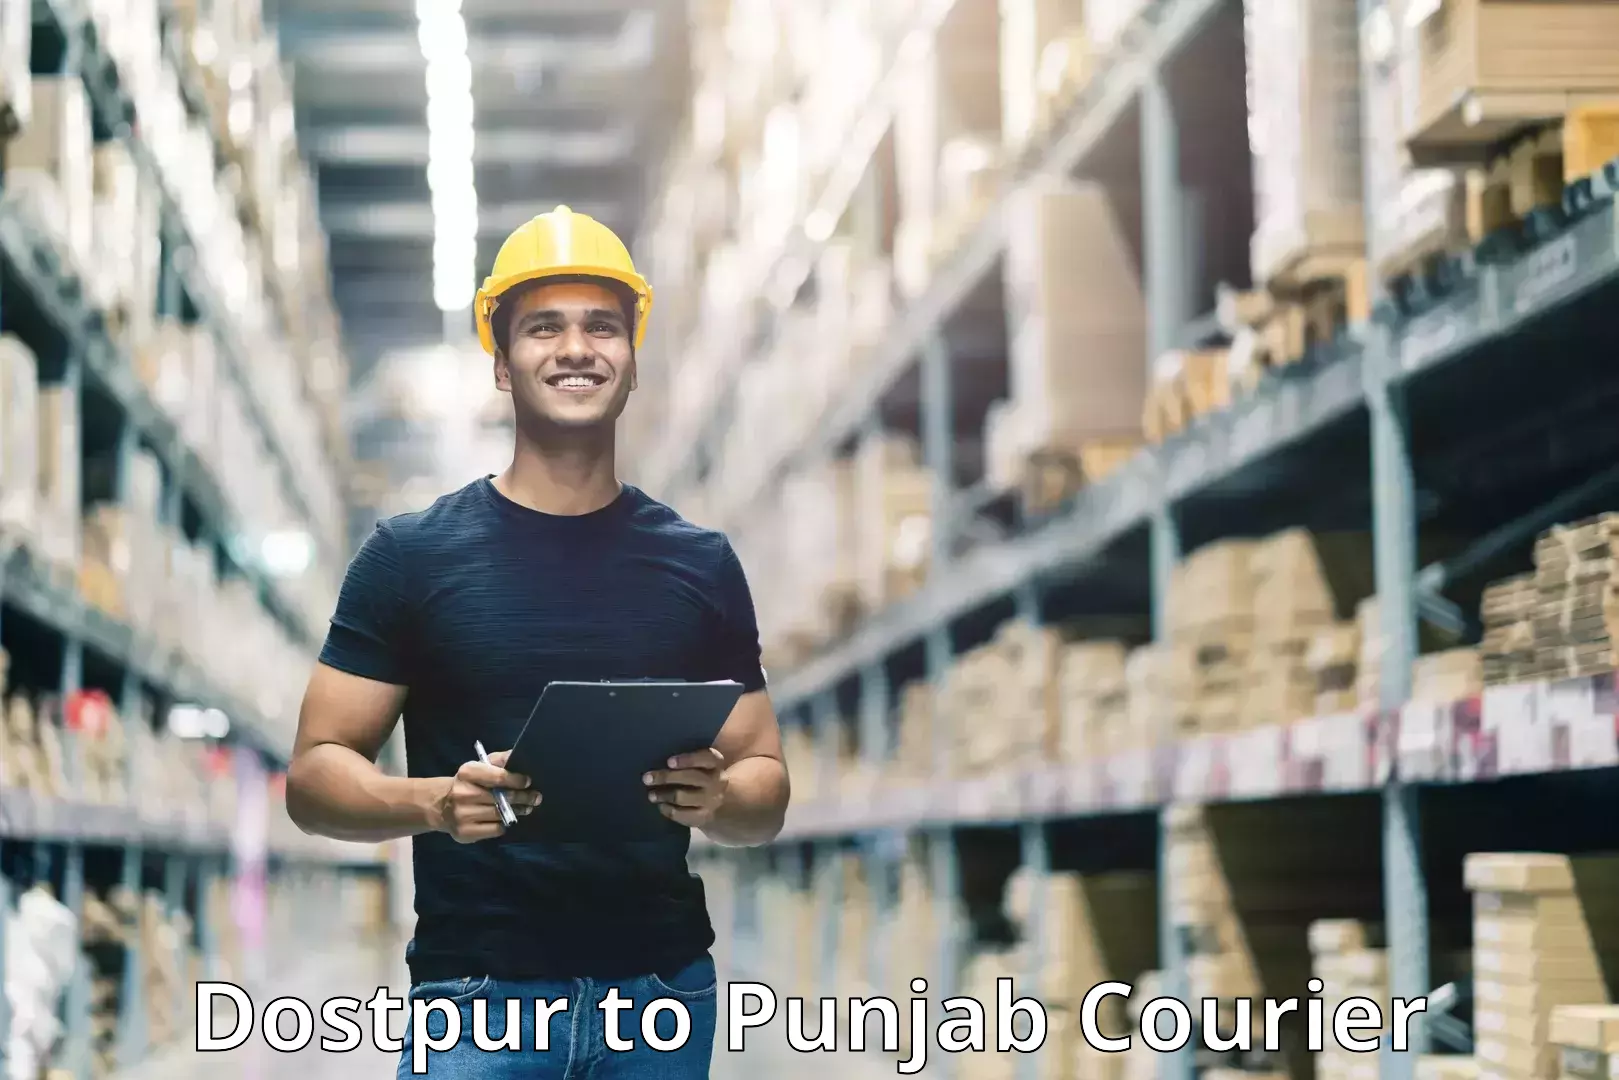 Courier service partnerships in Dostpur to Punjab